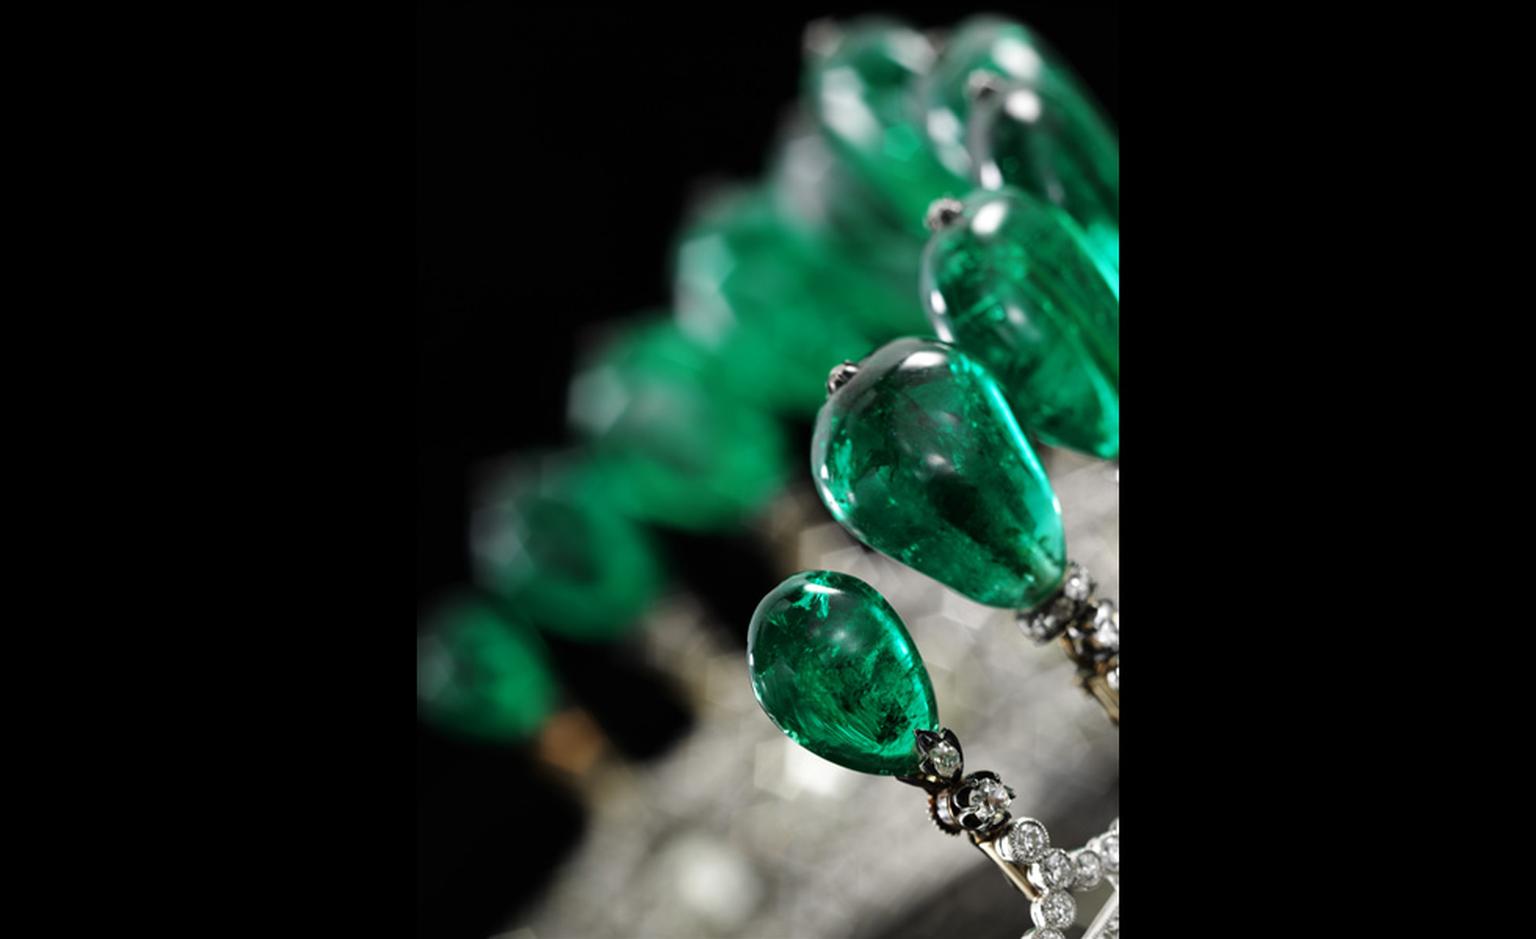 Close up of emerald tiara circa 1900 to be auctioned by Sotheby's in Geneva on 17 May with 11 rare Columbian emerald drops that may have been part of the French Imperial Crown jewels.